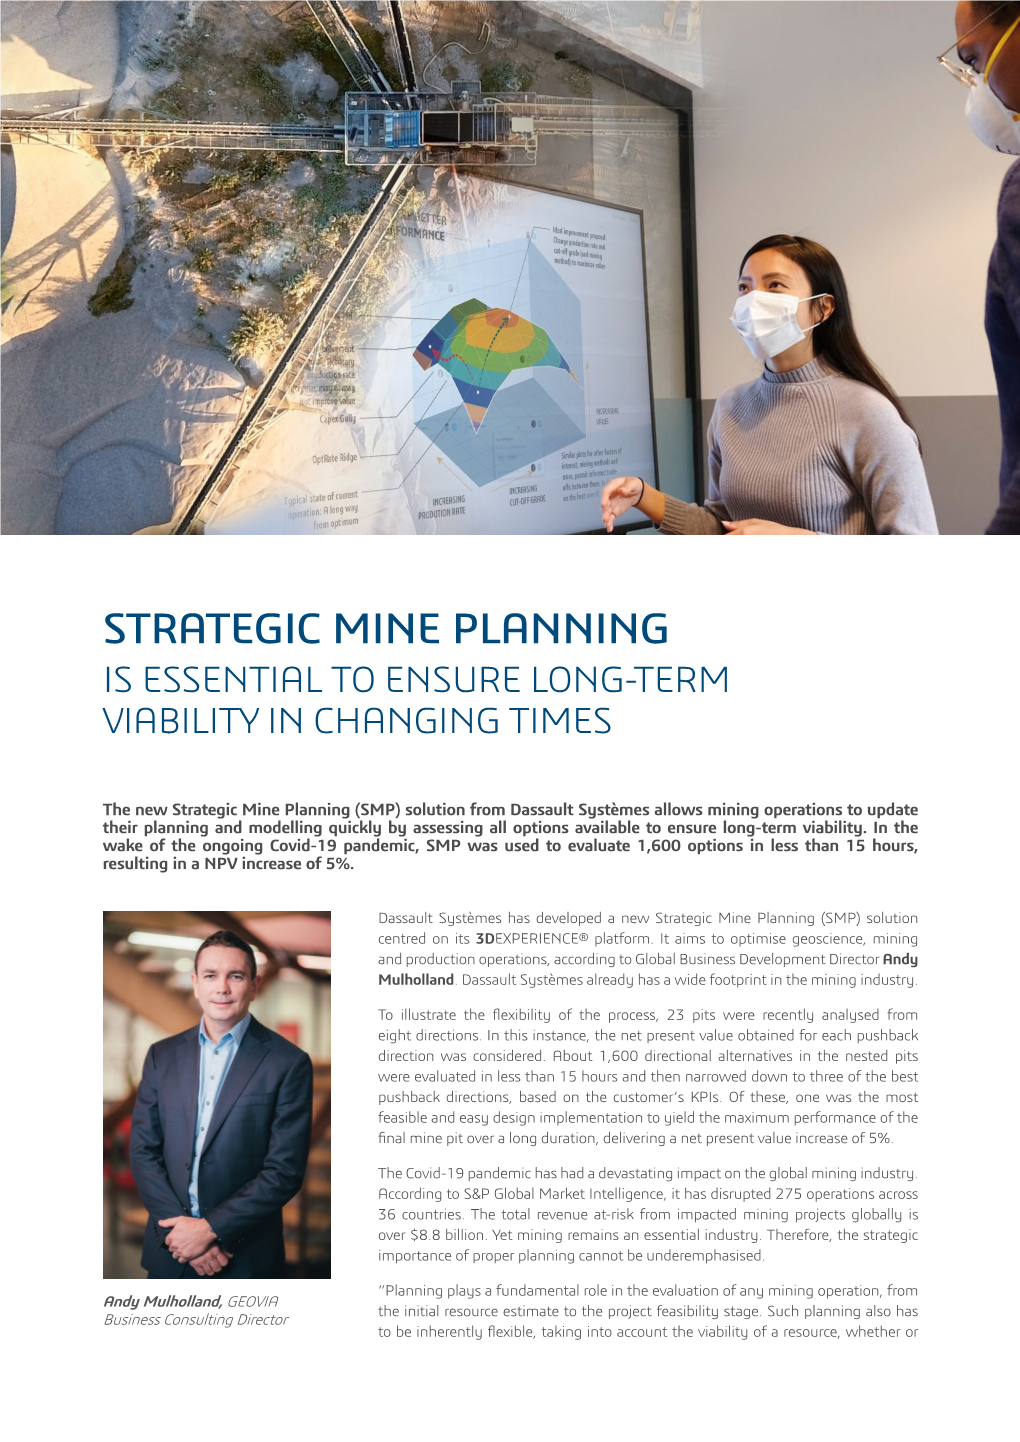 Strategic Mine Planning Is Essential to Ensure Long-Term Viability in Changing Times